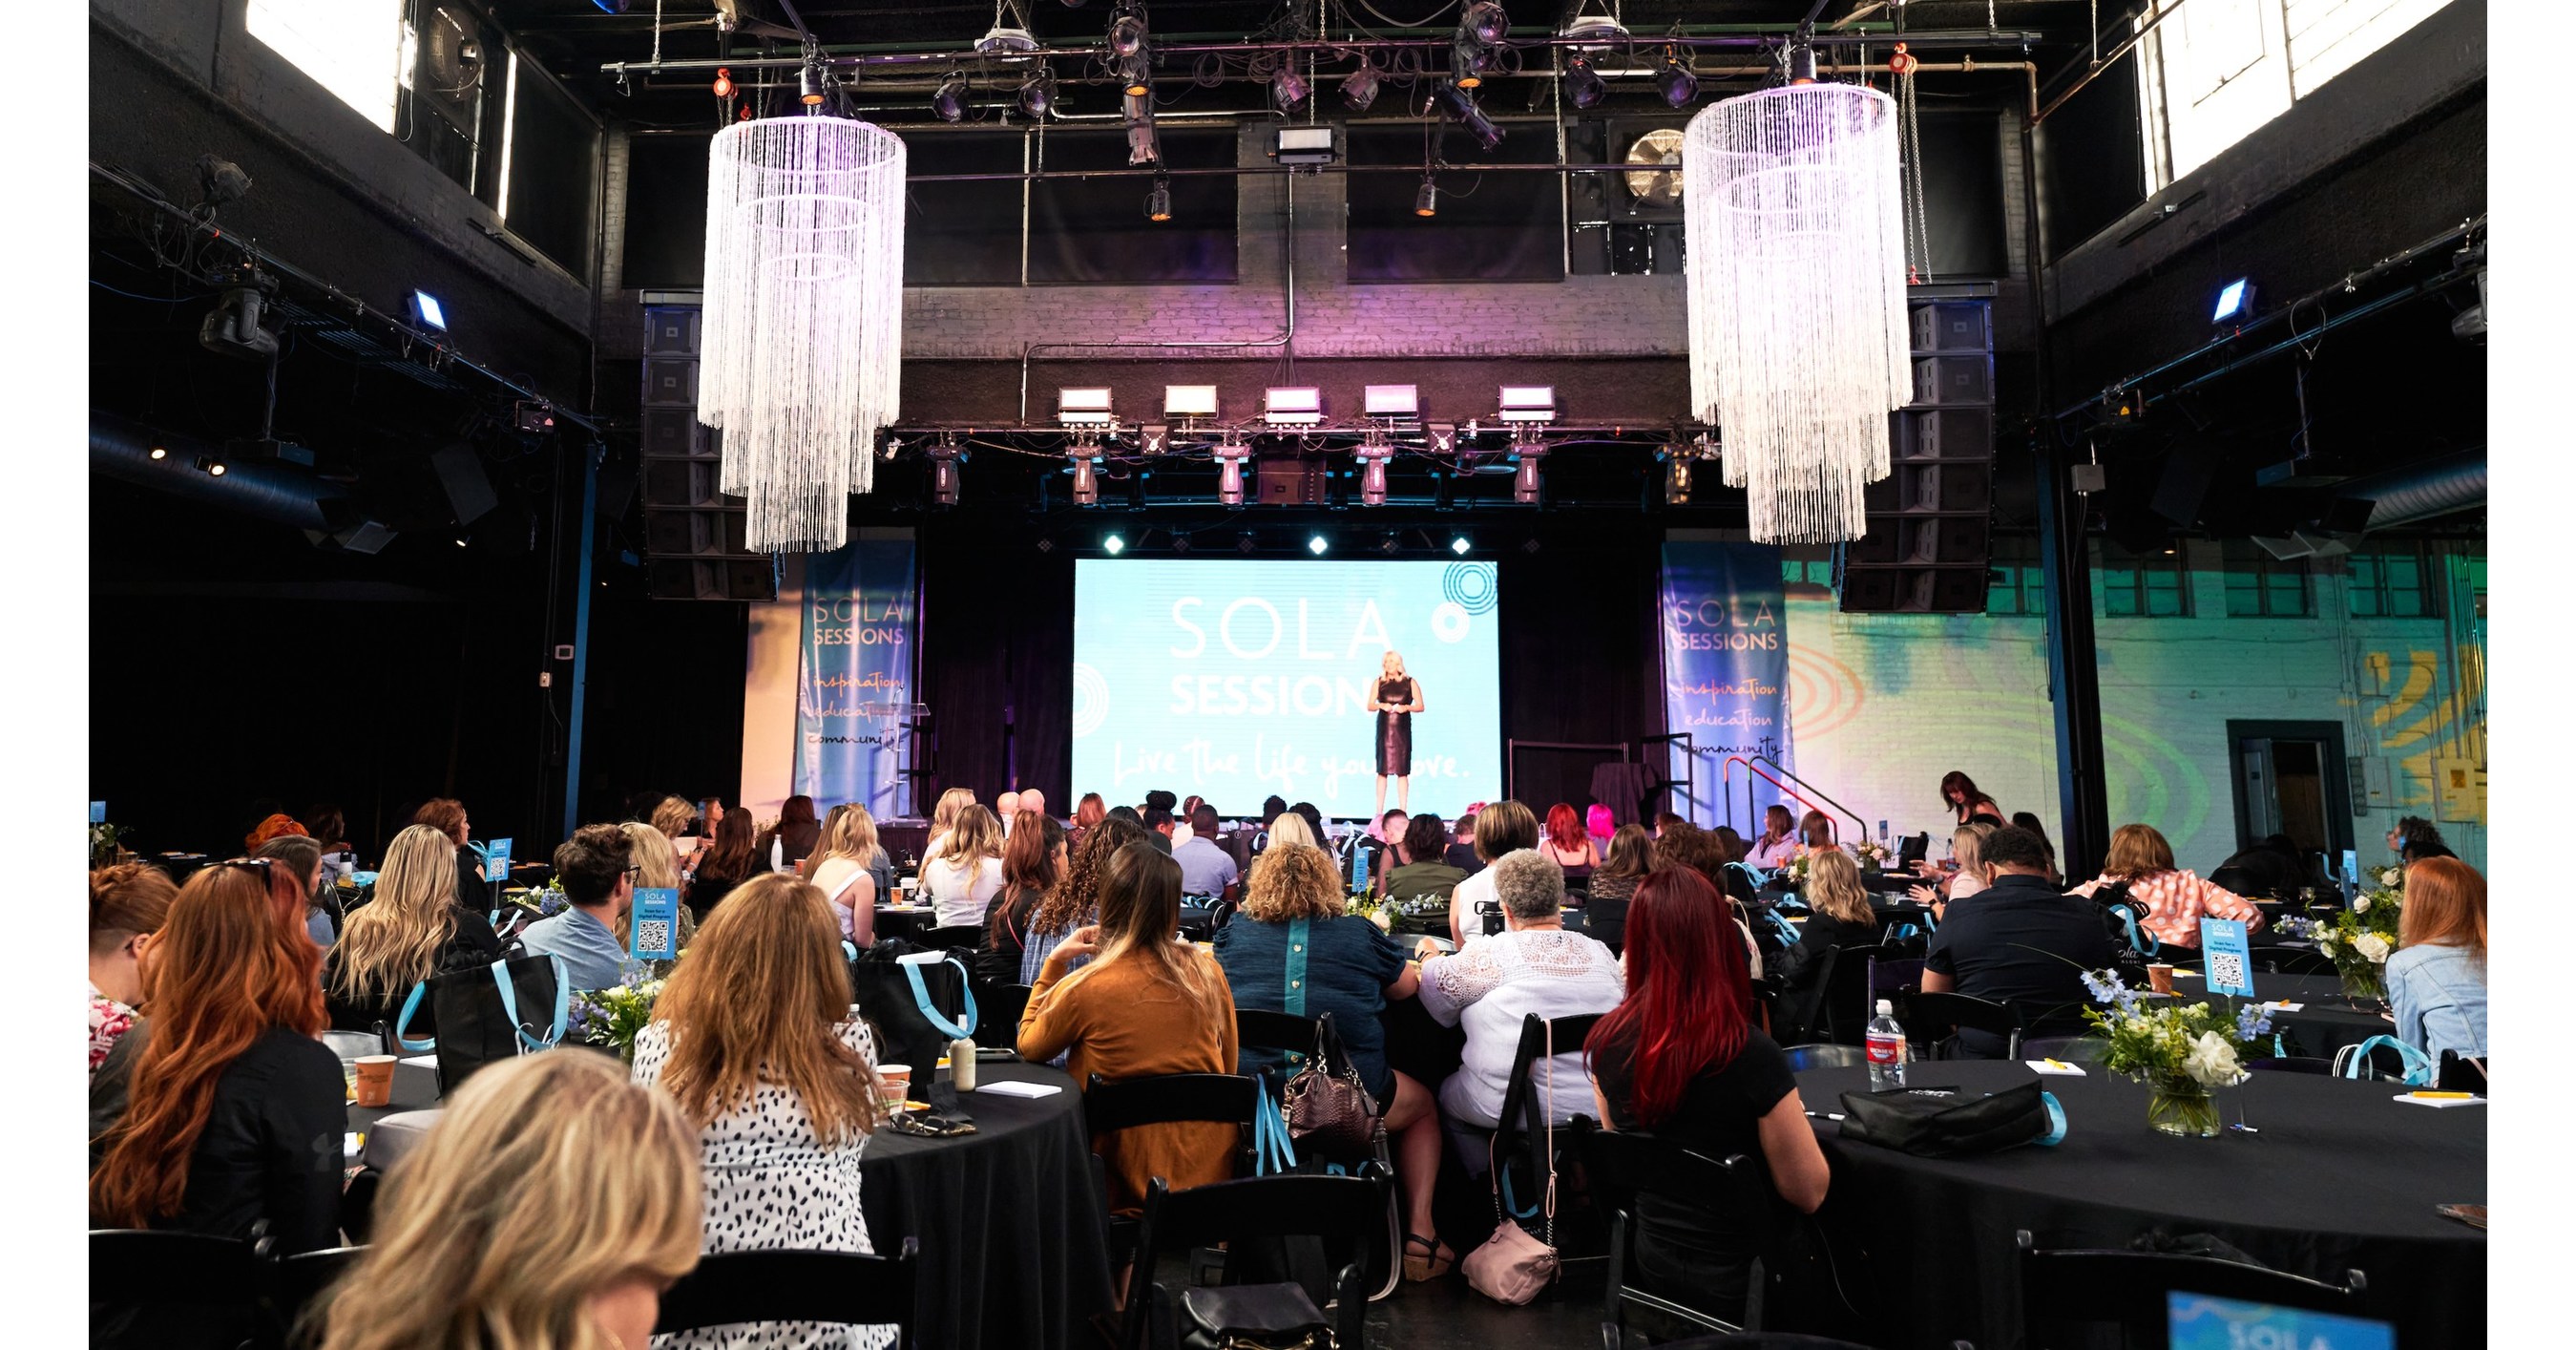 SOLA SALONS HOSTS SOLA SESSIONS IN DENVER TO EDUCATE, CONNECT AND